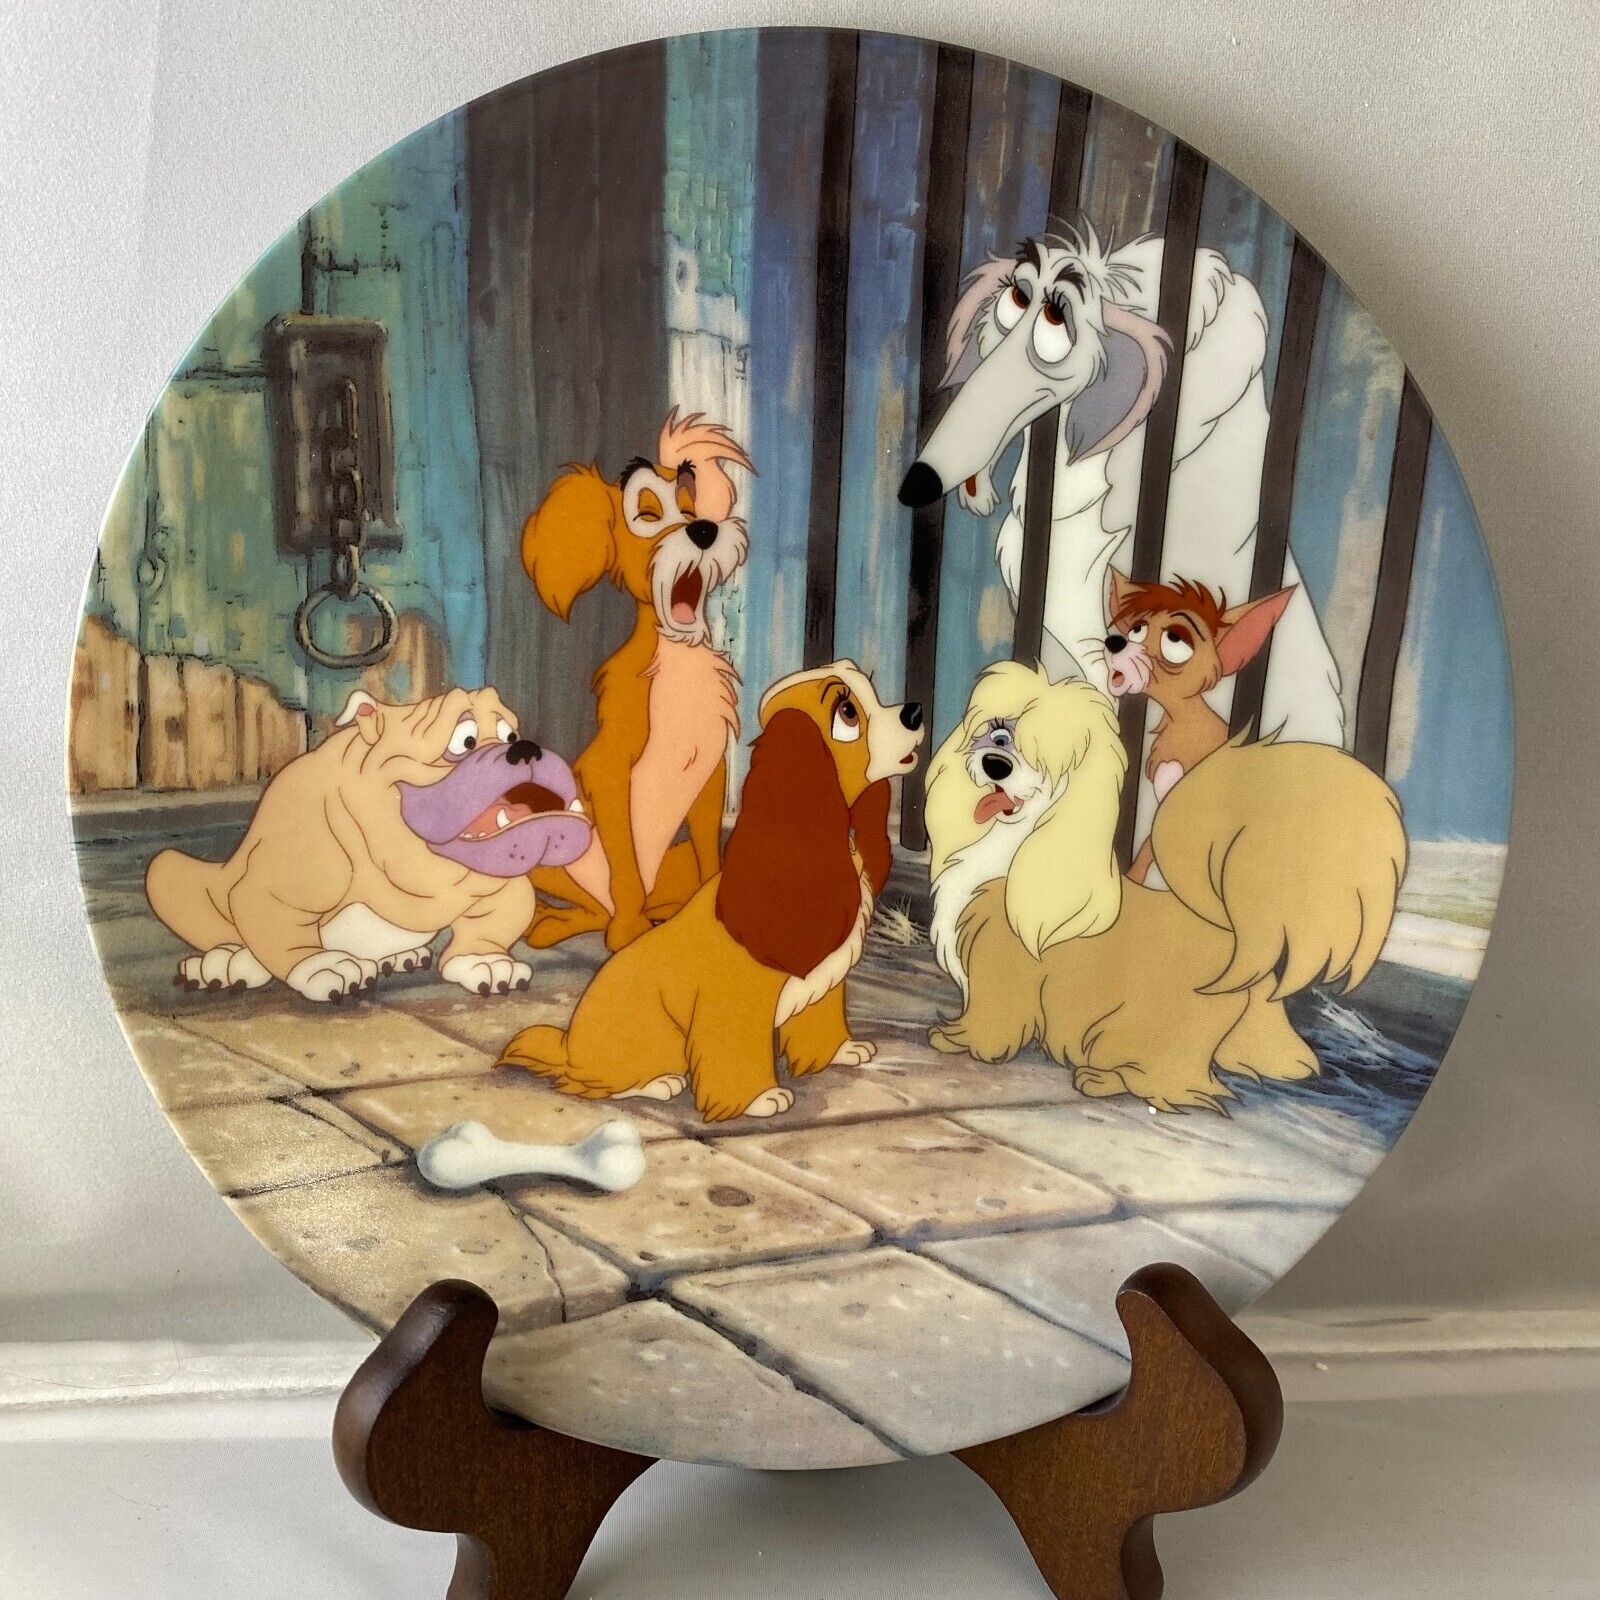 Knowles Disney Bambi Limited Edition Collectors Plate 